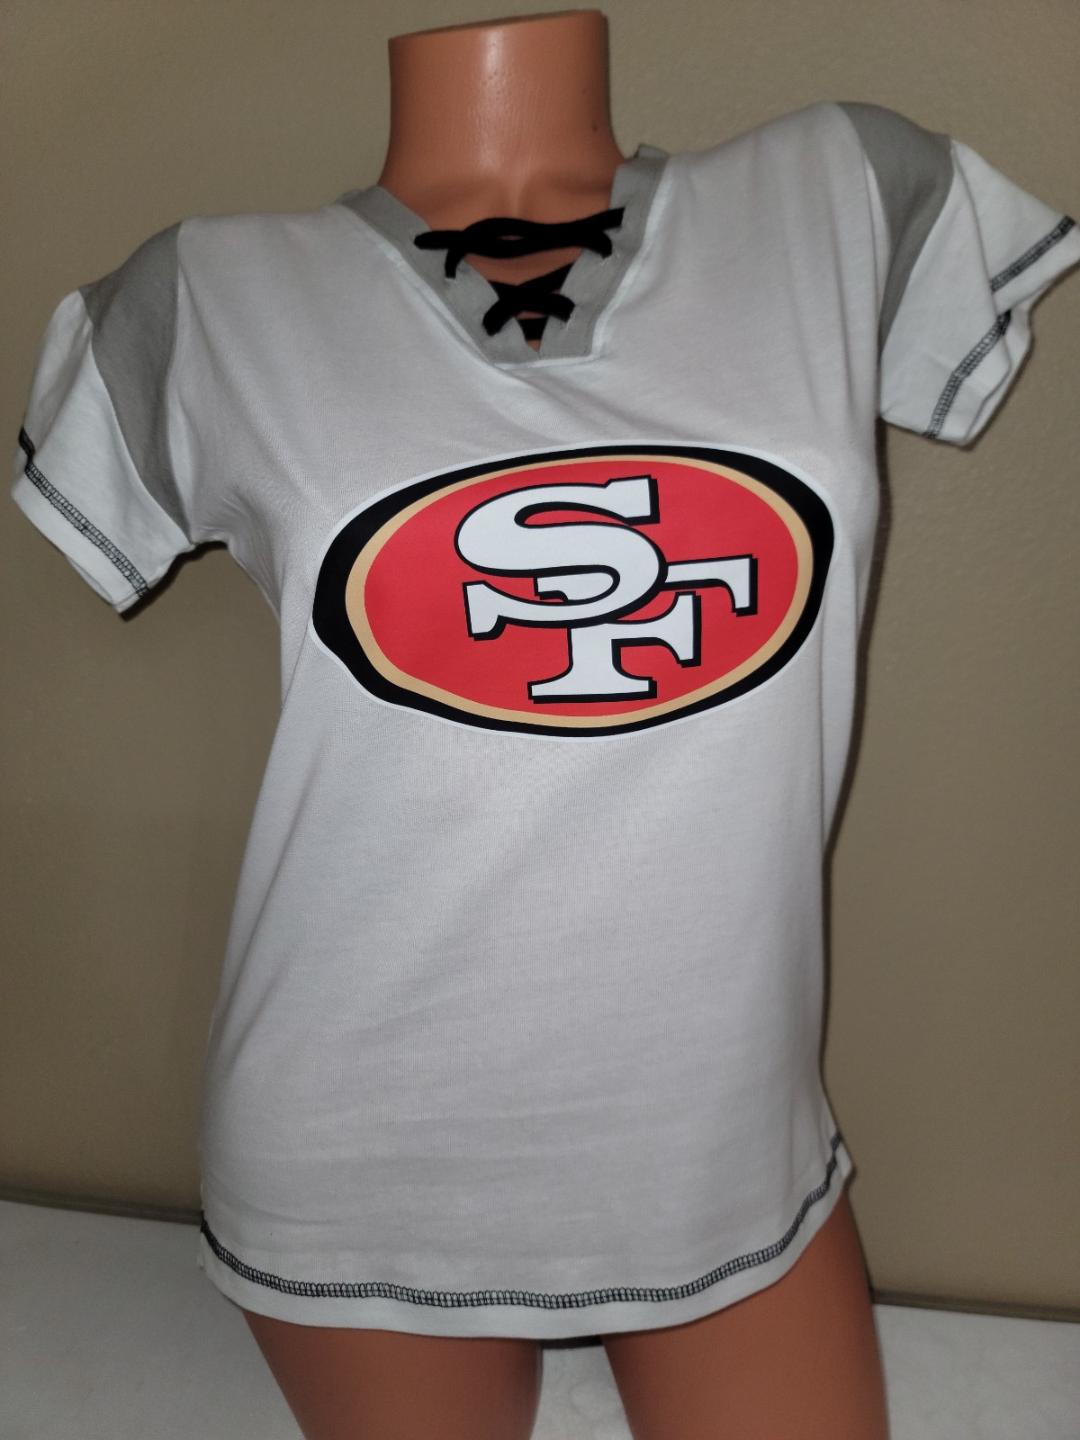 Womens Ladies NFL Team Apparel SAN FRANCISCO 49ers Laces Football Jersey  SHIRT White